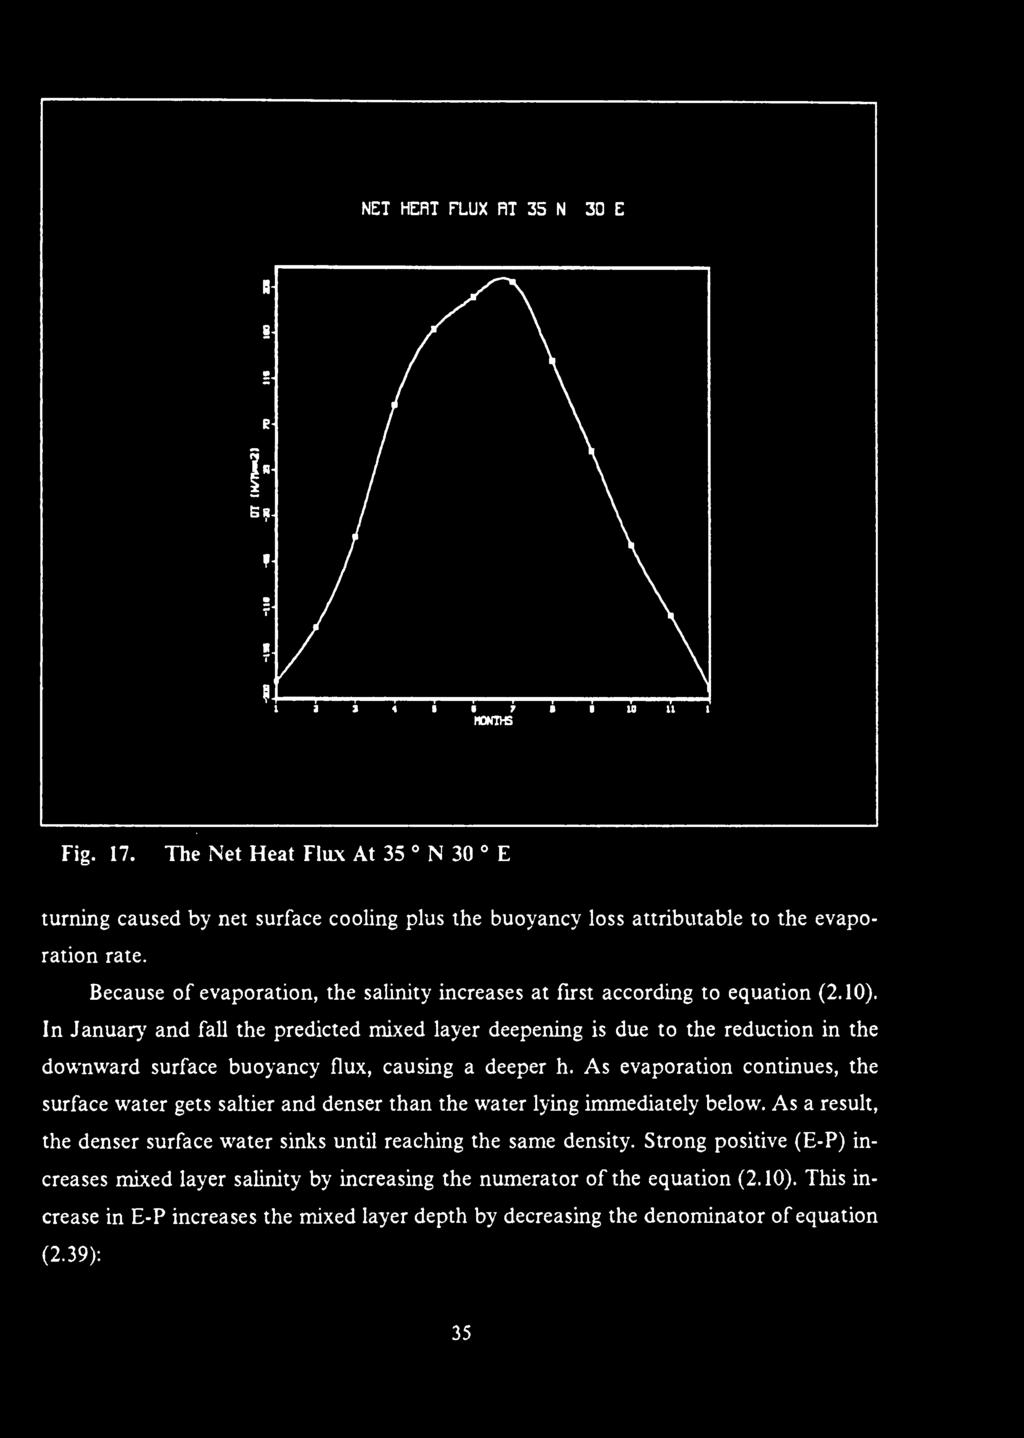 NET HEAT flux AT 3S N JO E 'r.-r-r-r-r-r,-r,-r-r~~~..,_ fig. 17. The 1\et Heat Flux At 35 N 30 E turrting caused by net surface cooling plus the buoyancy loss attributable to the evapo ration rate.